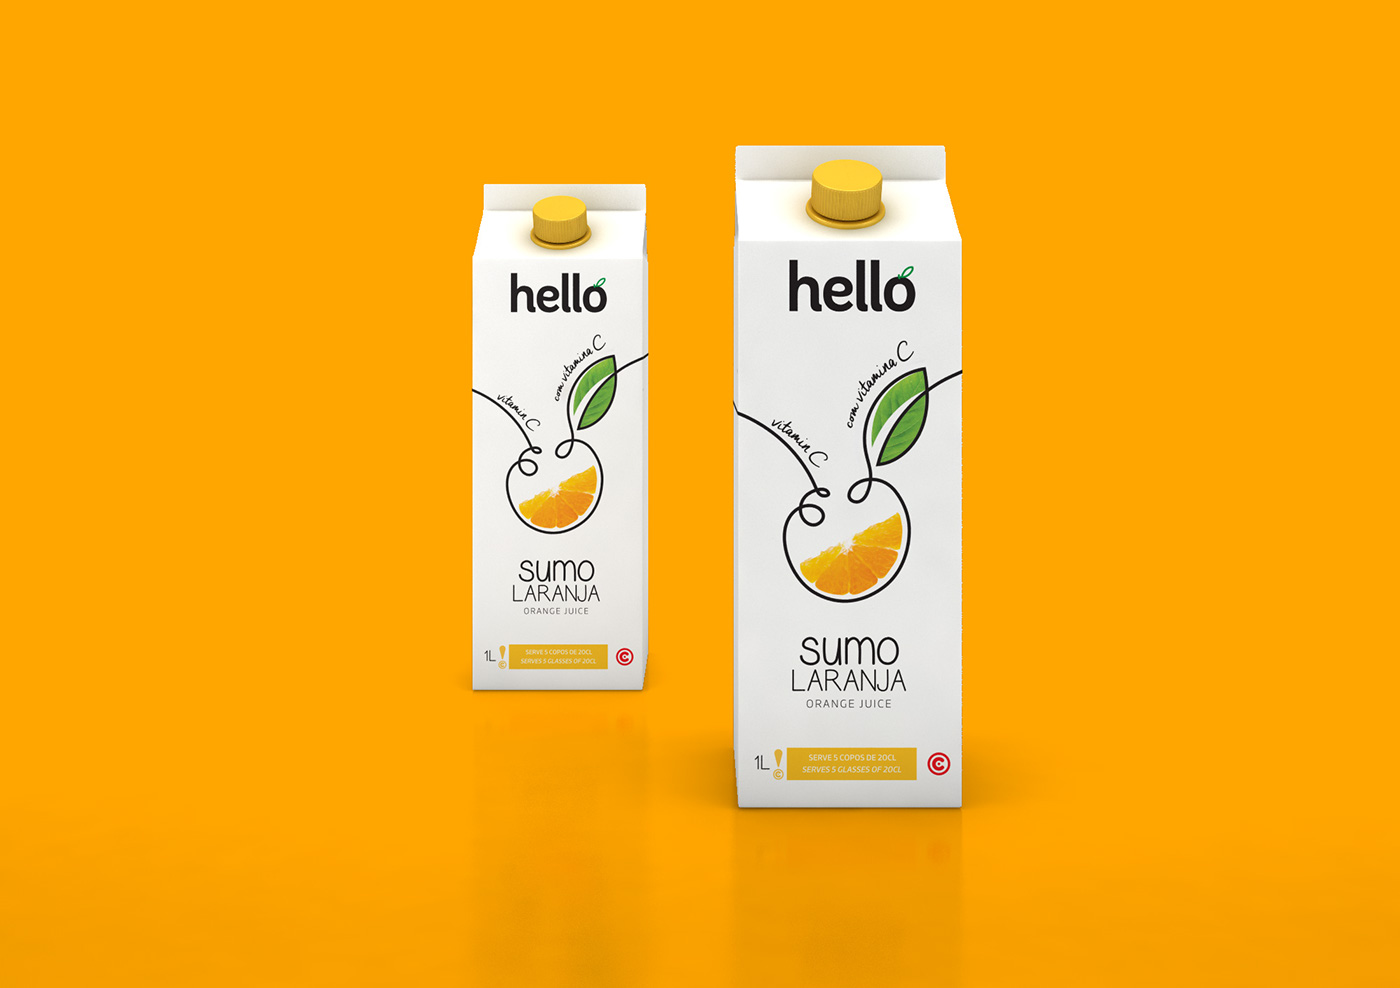 Hello package. Behance сок. Packaging привет.